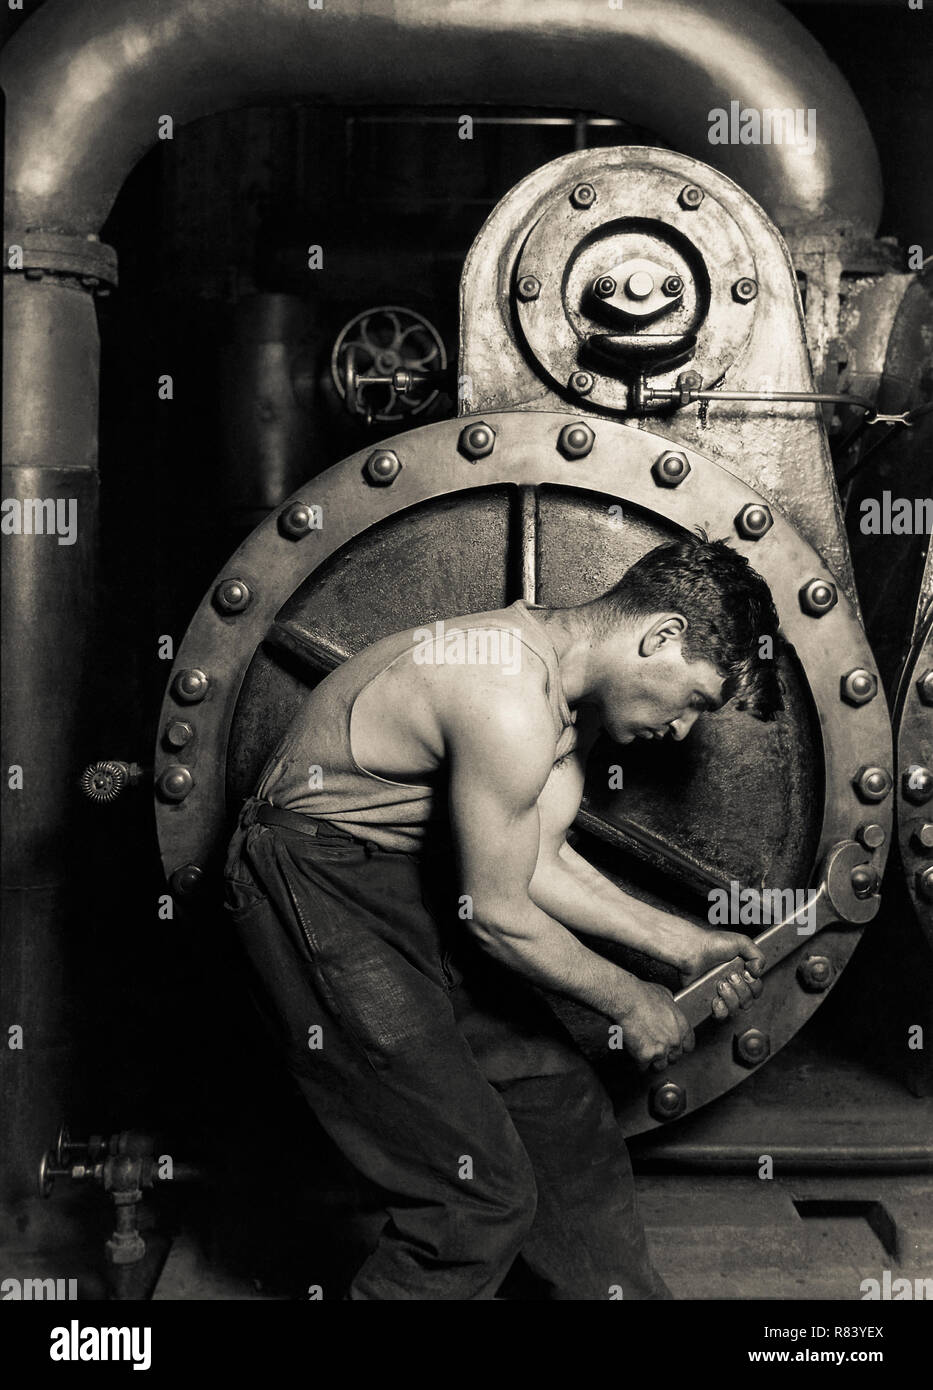 Lewis Hine (1874-1940) 'Power house mechanic working on steam pump' 1920. Vintage print. Records of the Work Projects Administration. (69-RH-4L-2) Stock Photo